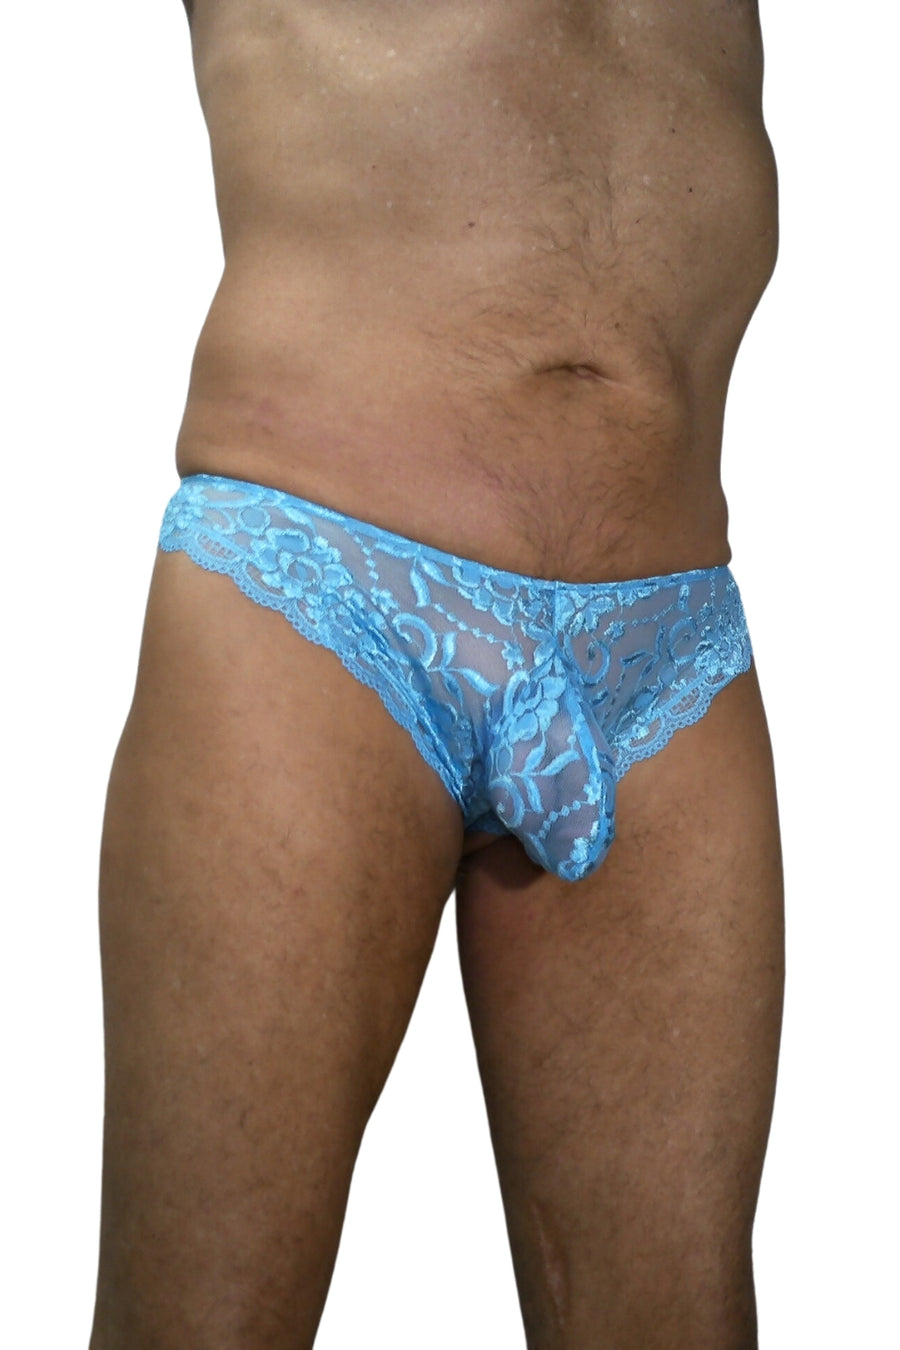 Baby Blue Lace Brief with a Brazillain cut back and a generous pouch designed for your genitals. Low rise design and see through.